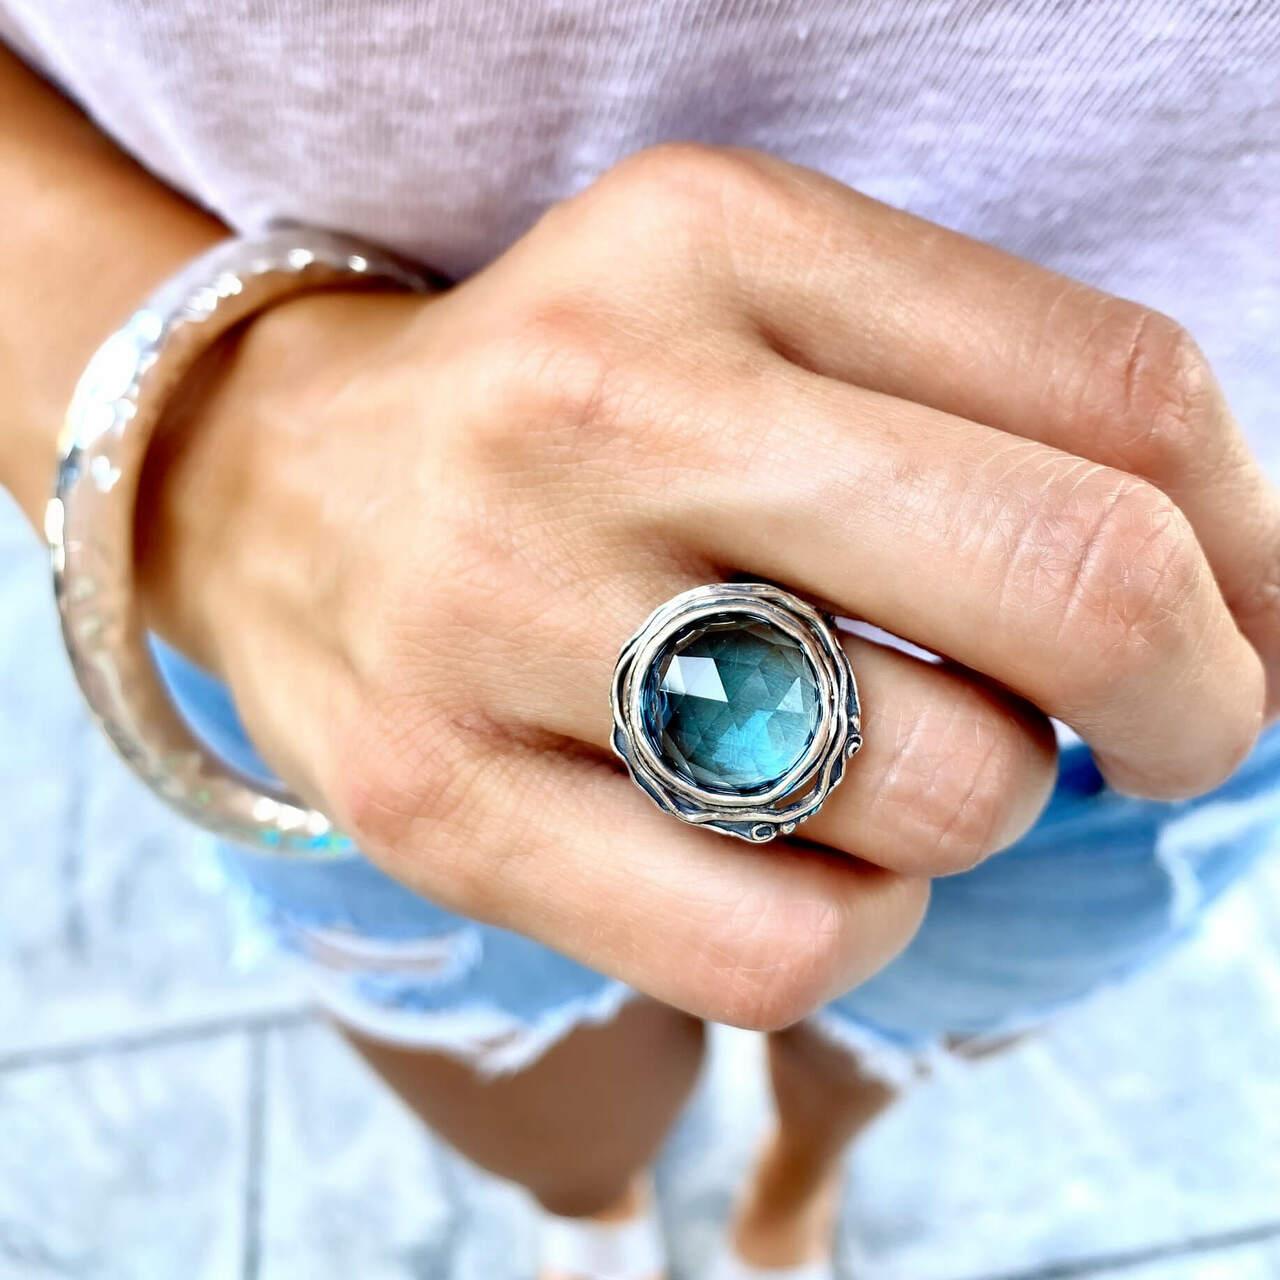 Cool Waters Ring in handcrafted sterling silver and Sonoma Bracelet